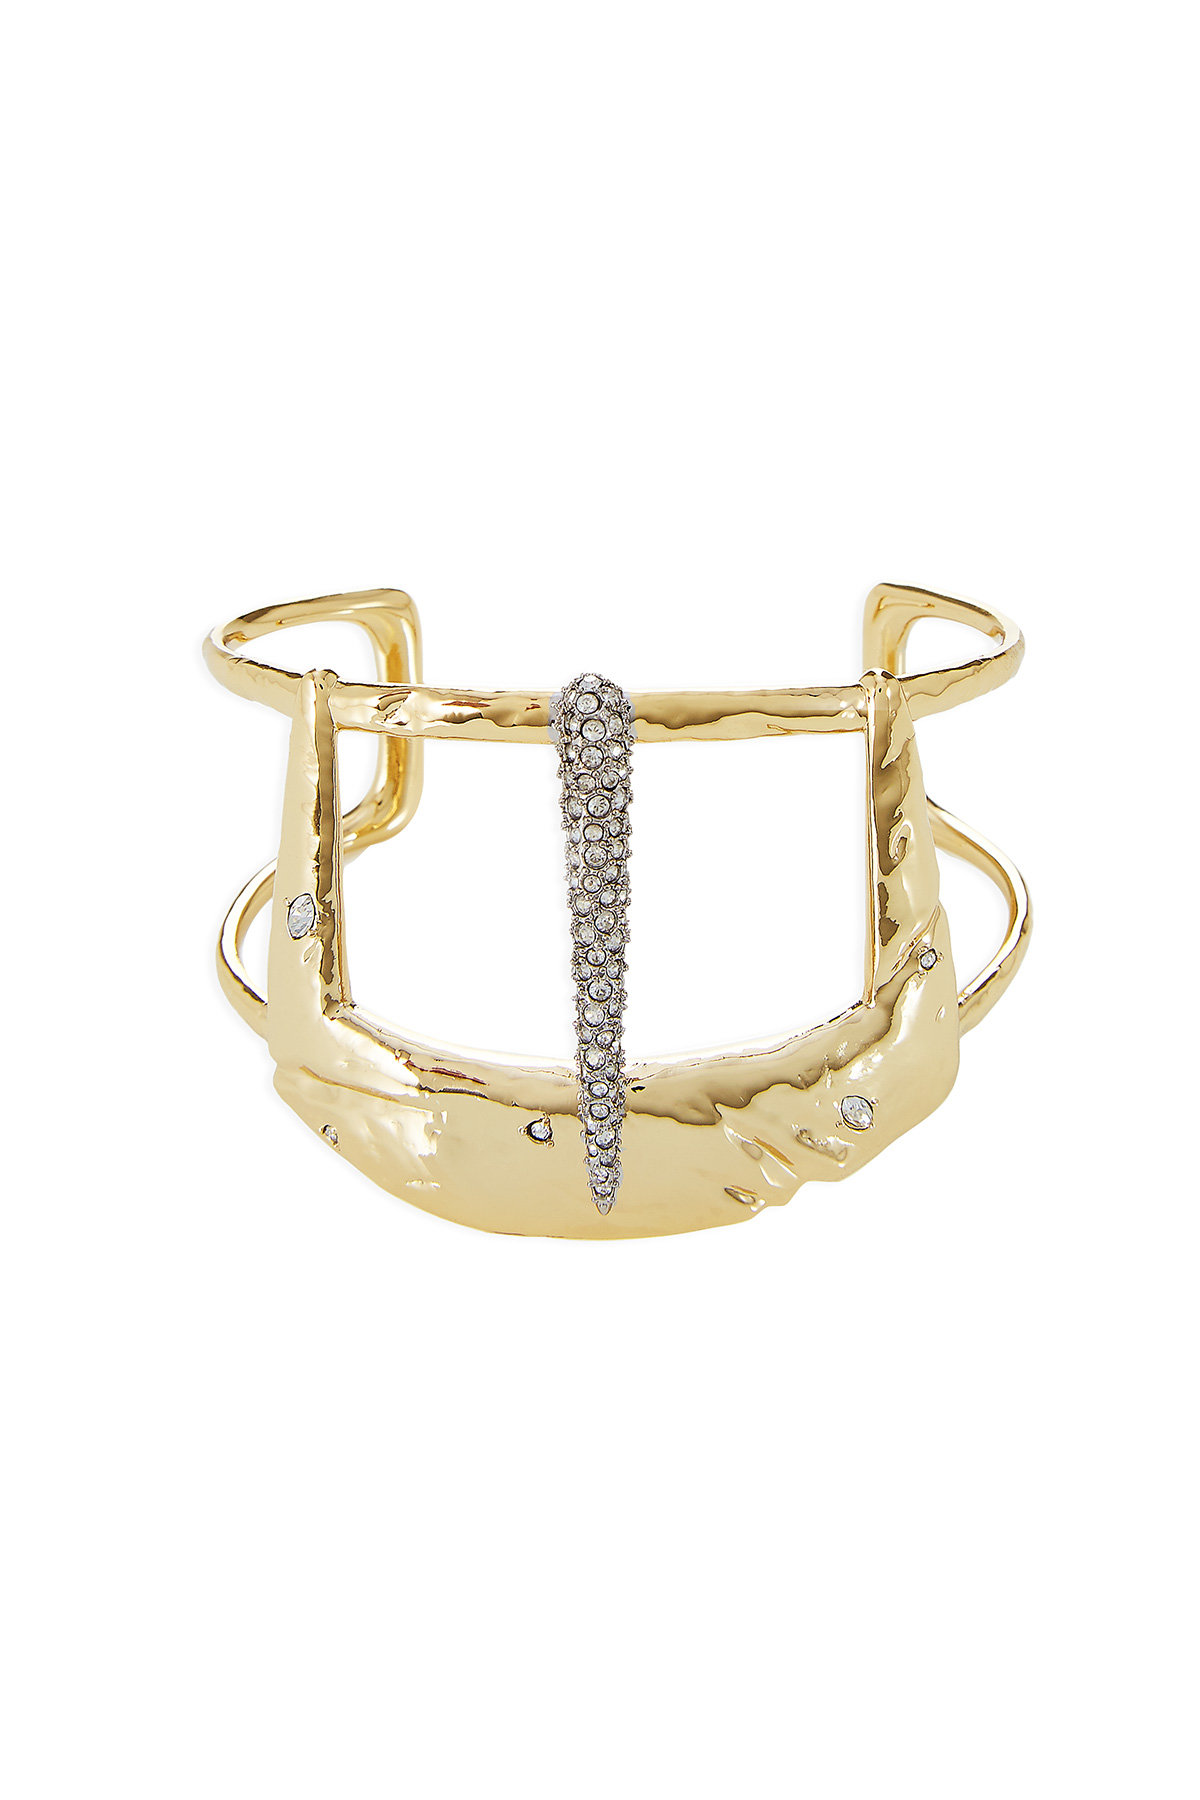 10kt Gold Cuff Bracelet with Crystals by Alexis Bittar